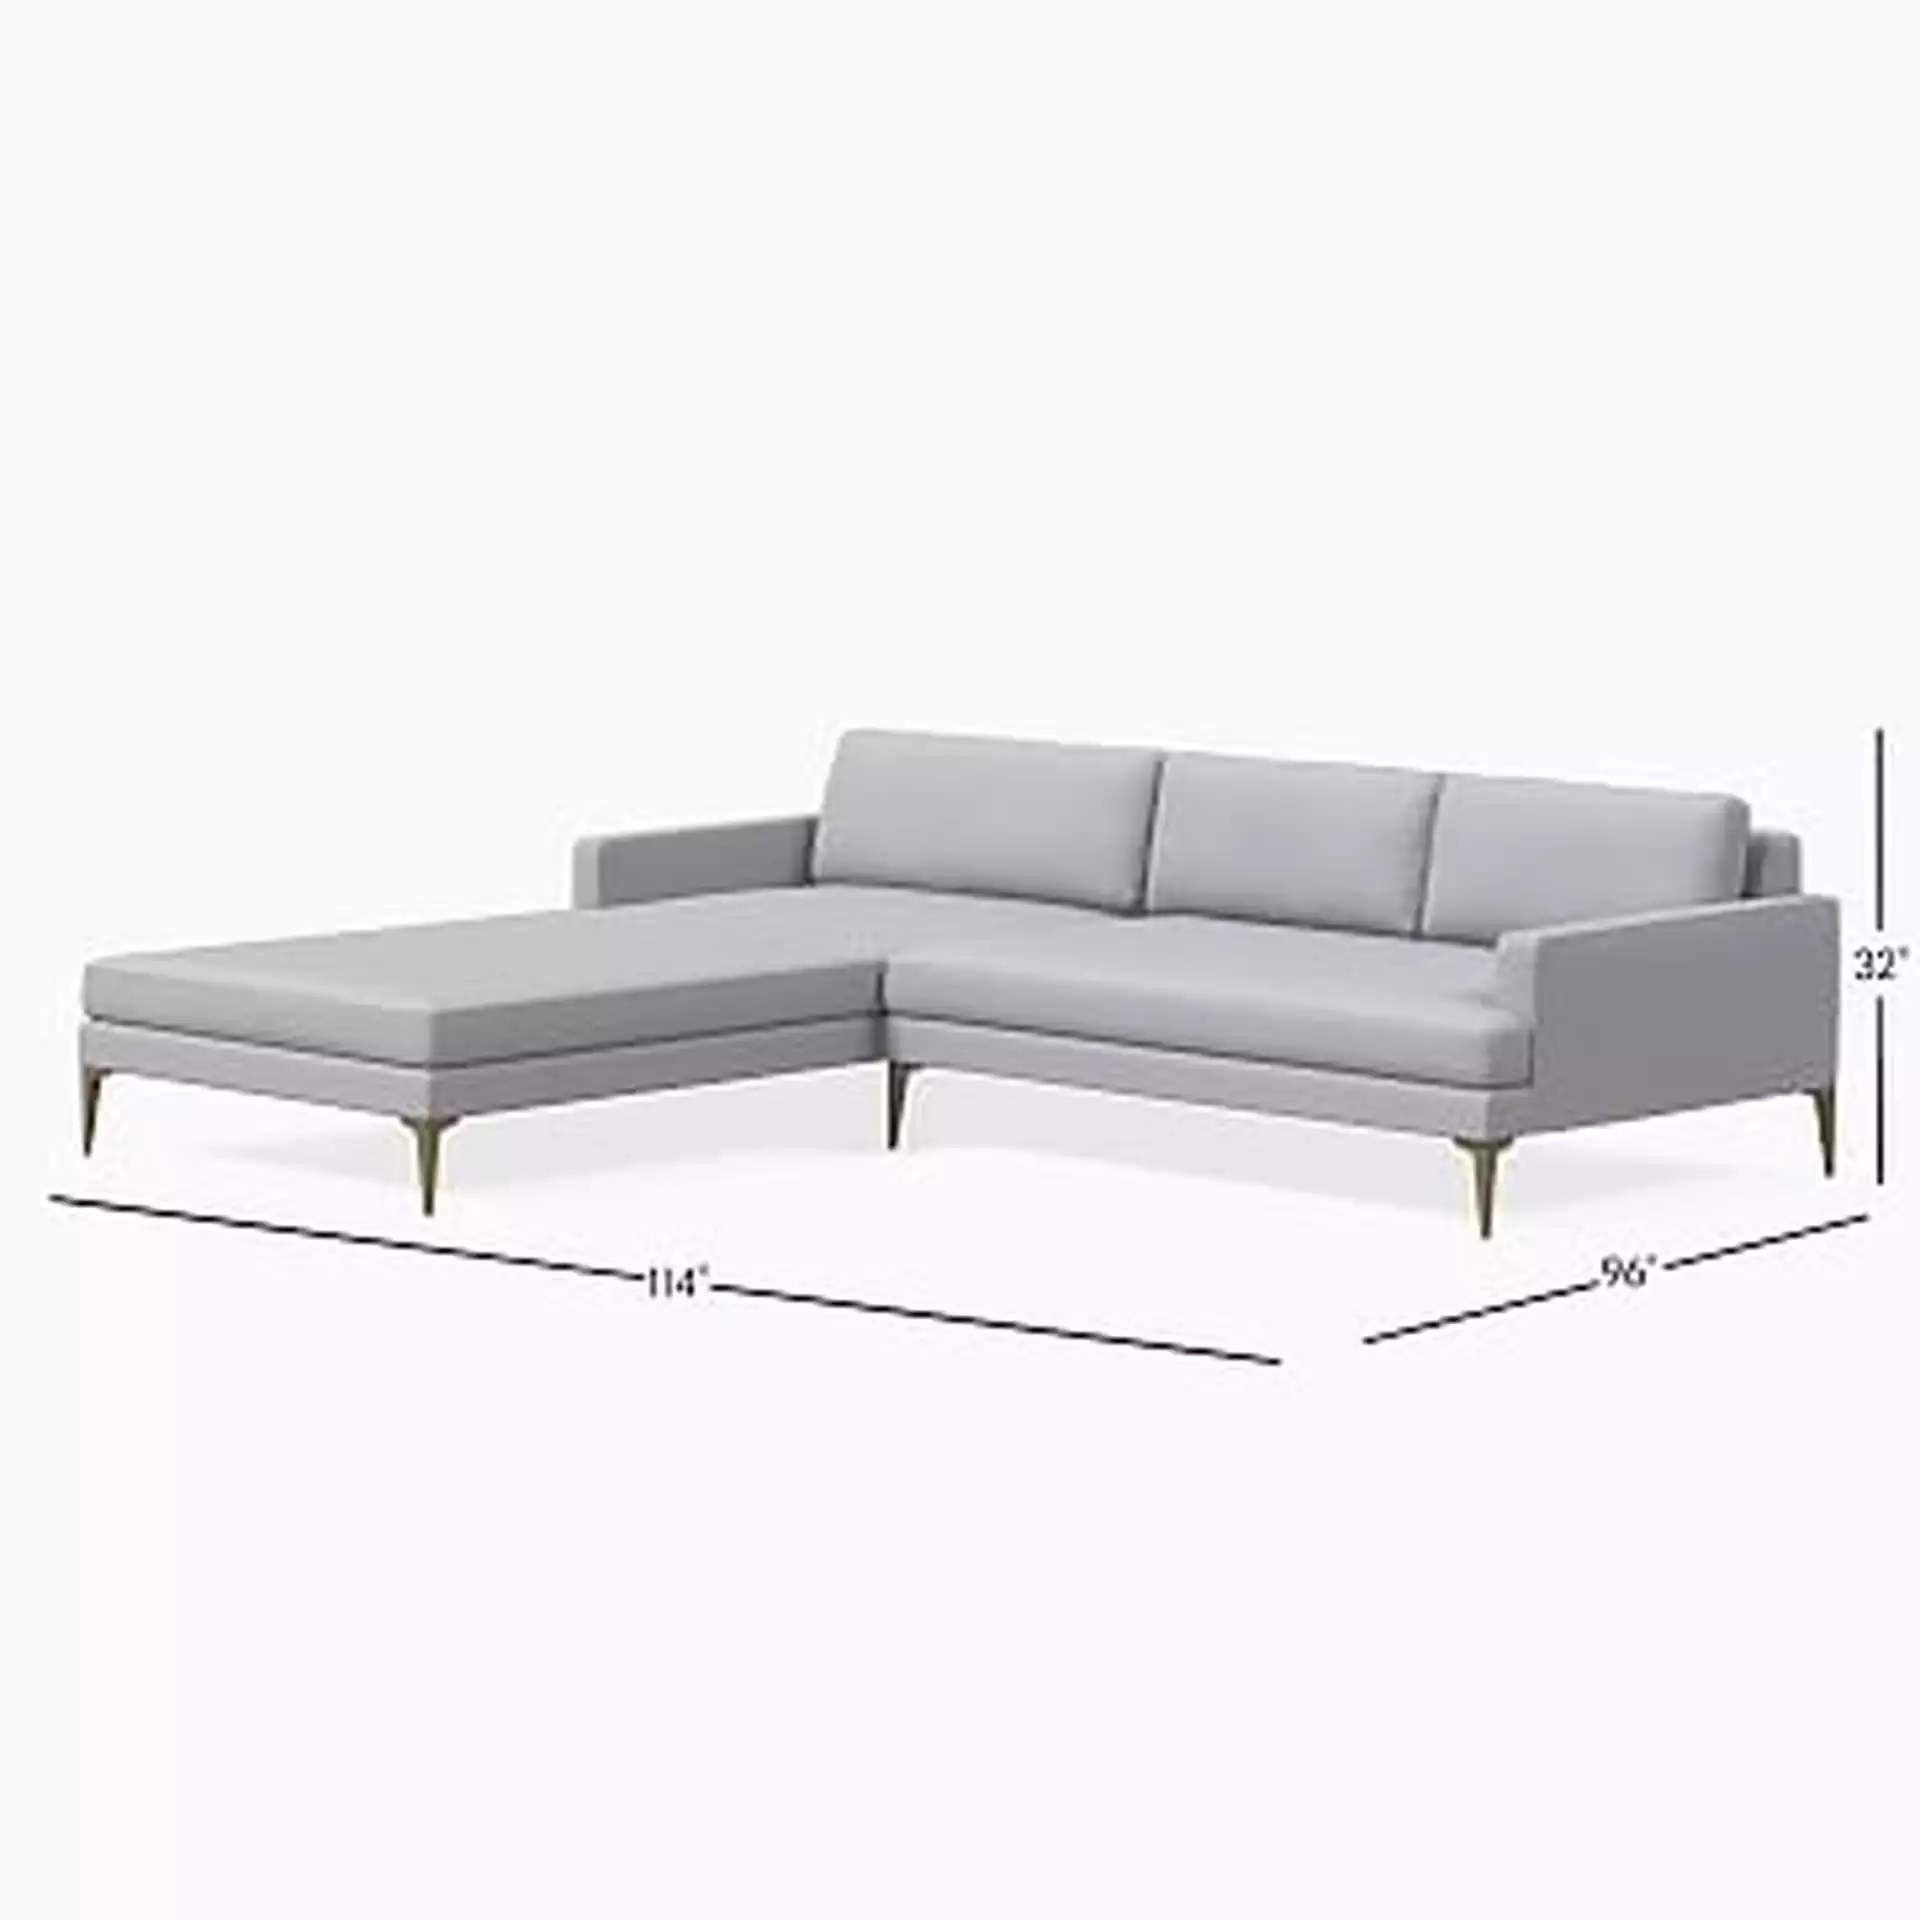 Andes Sectional Set 17: Left Arm 2.5 Seater Sofa, Right Arm Chaise, Distressed Velvet, Ink Blue, Dark Pewter